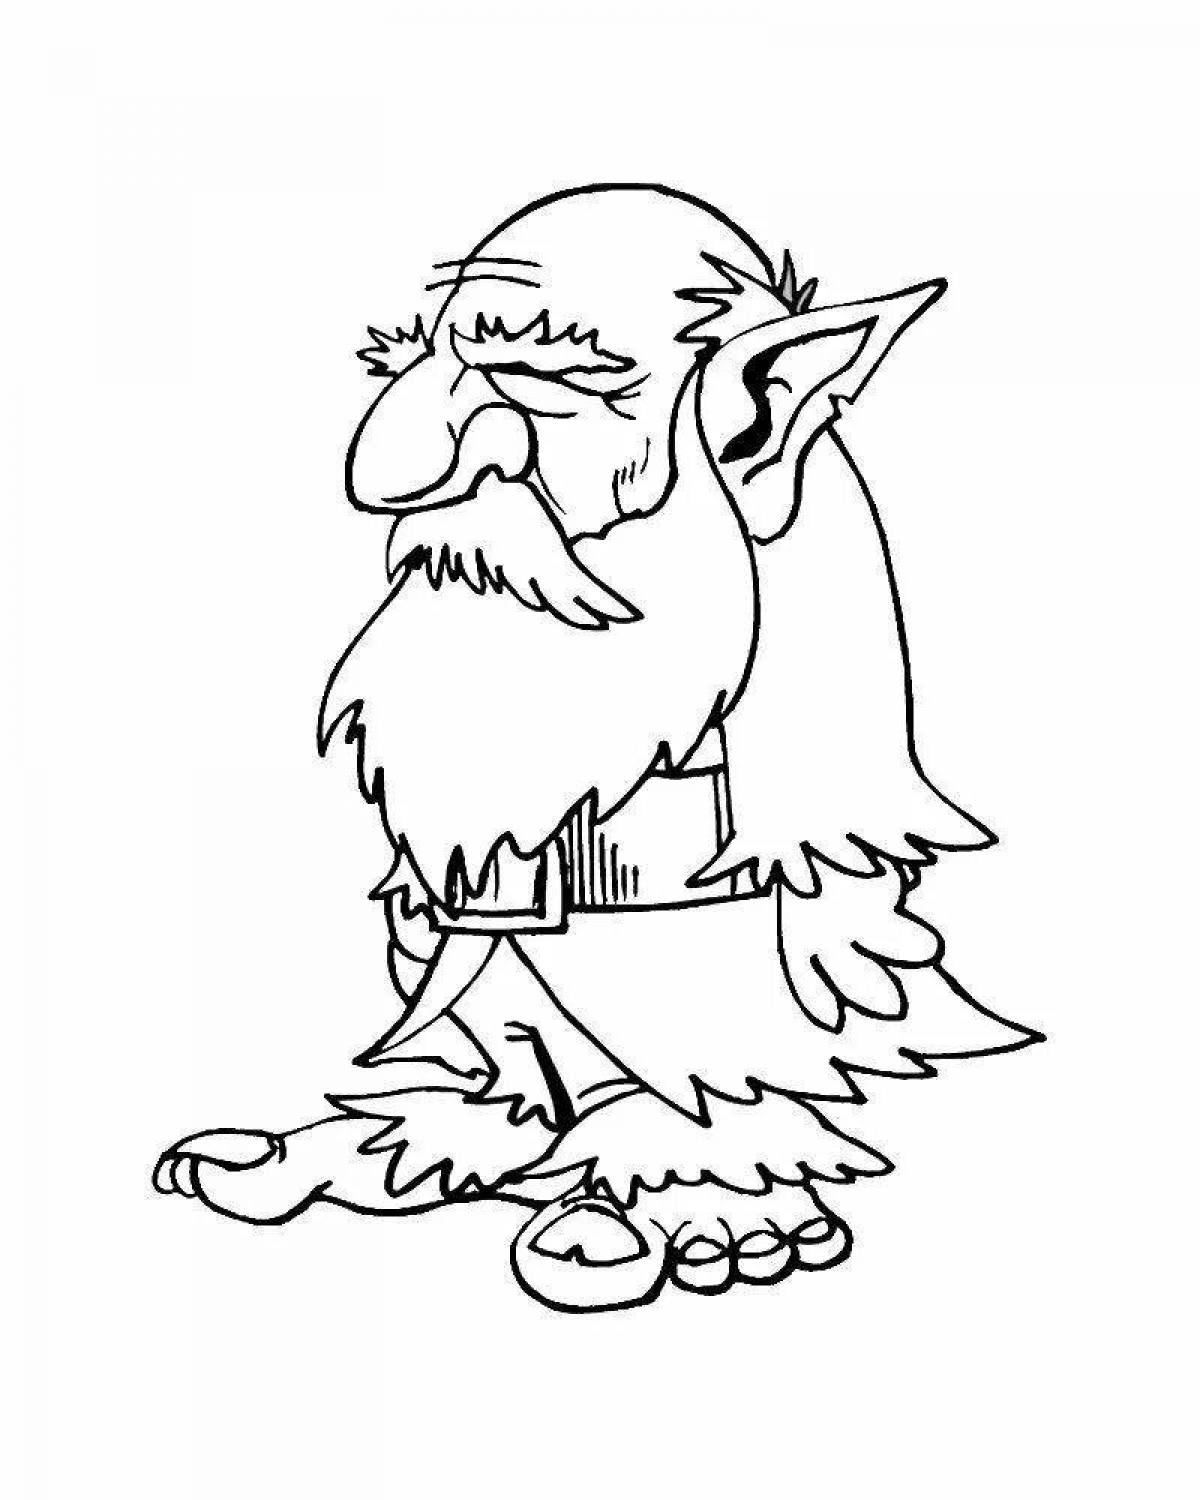 Stupid goblin coloring page